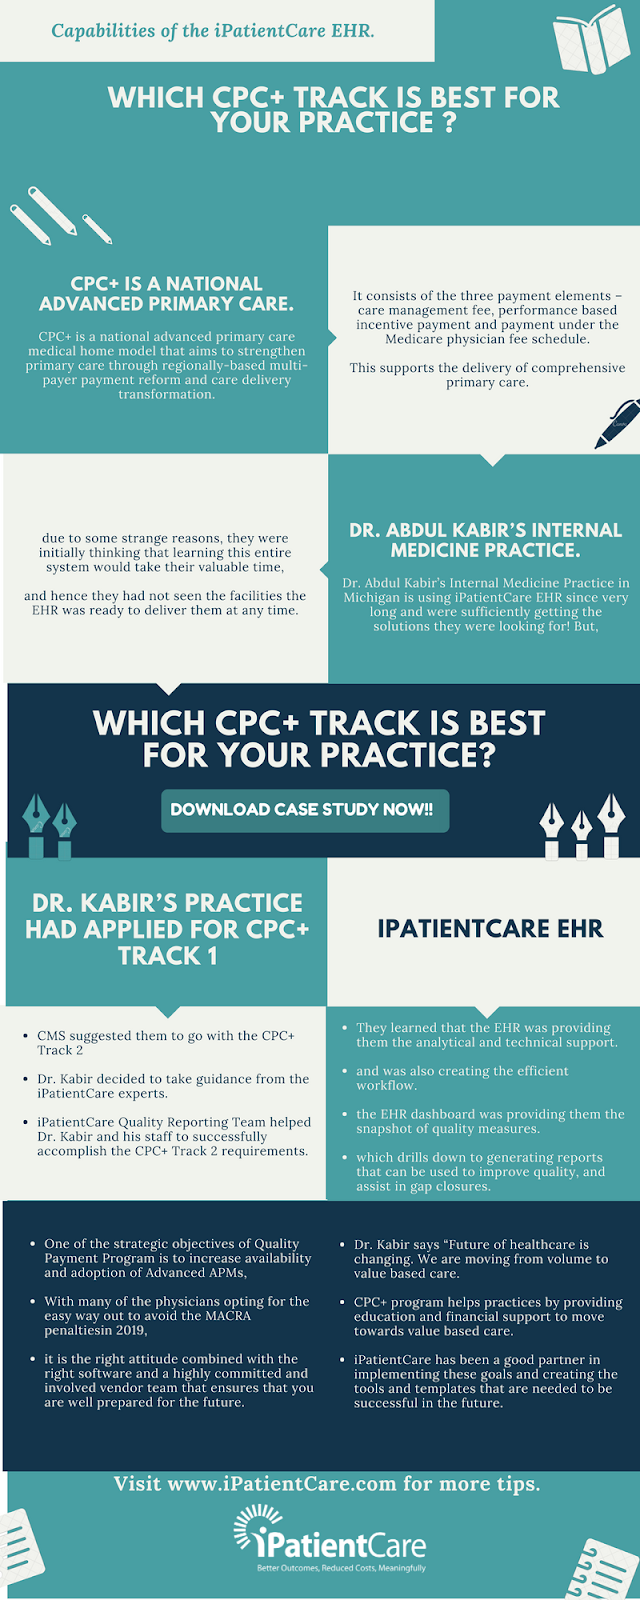 Which CPC+ Track is best for your Practice?